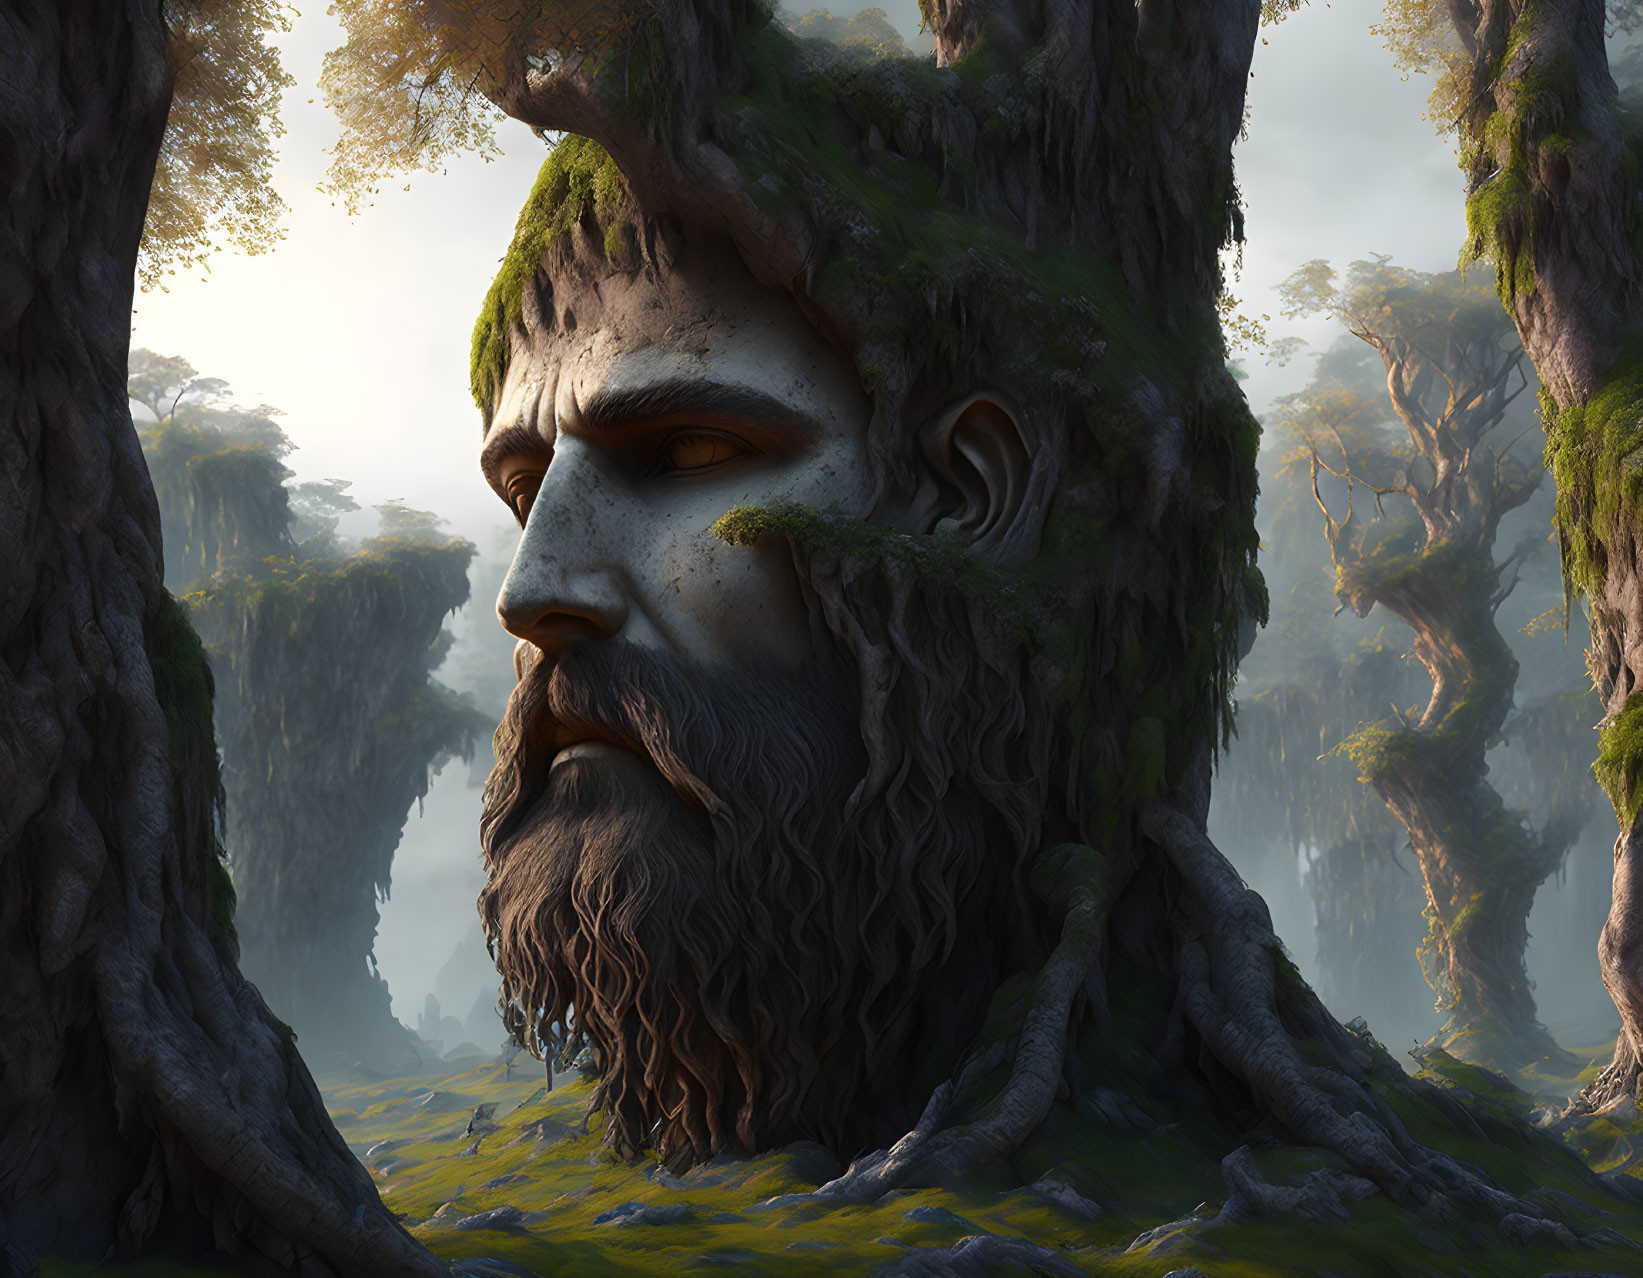 the head of a man in a tree